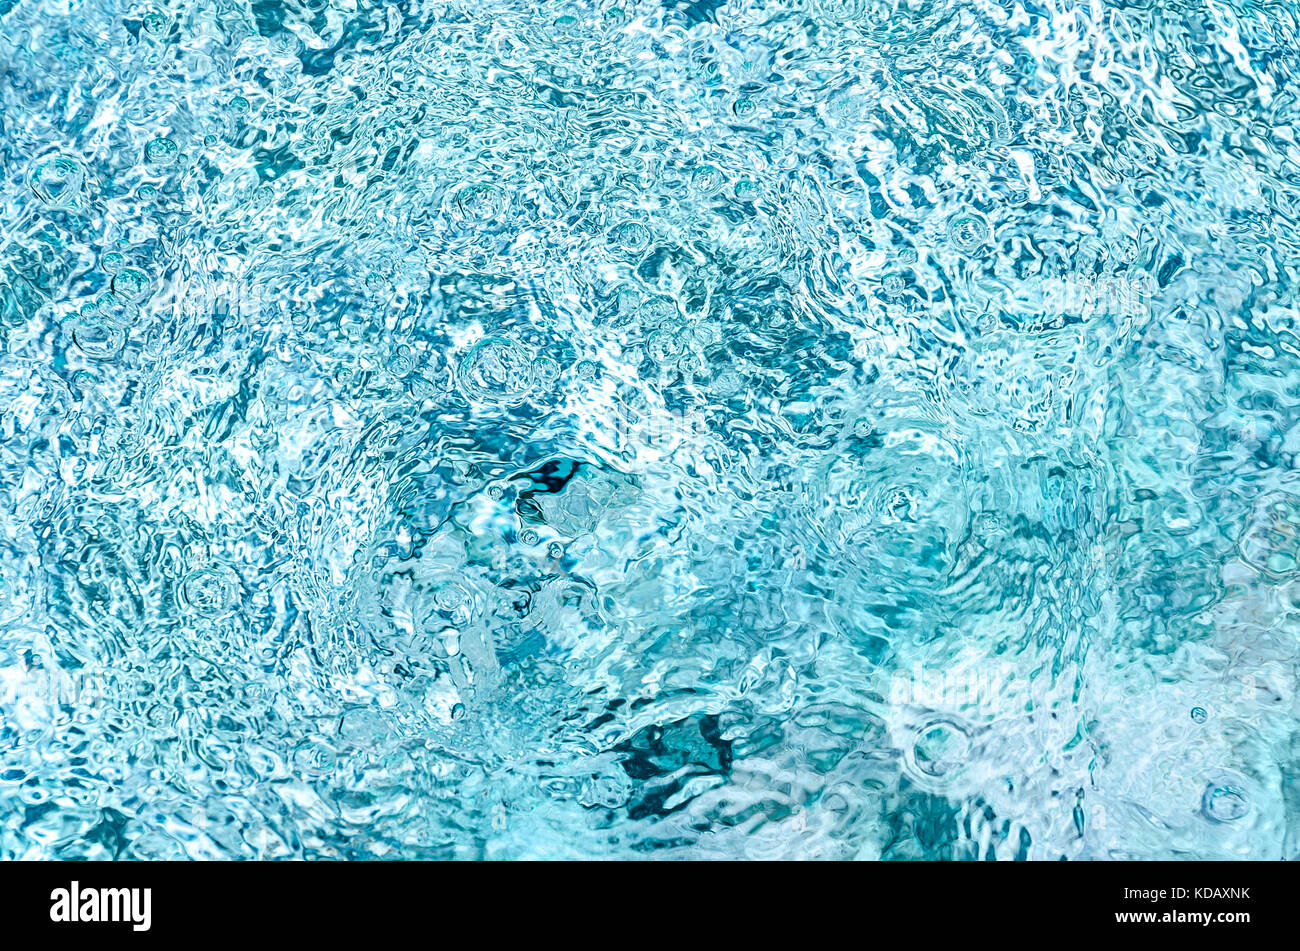 Blue swimming pool rippled water detail Stock Photo